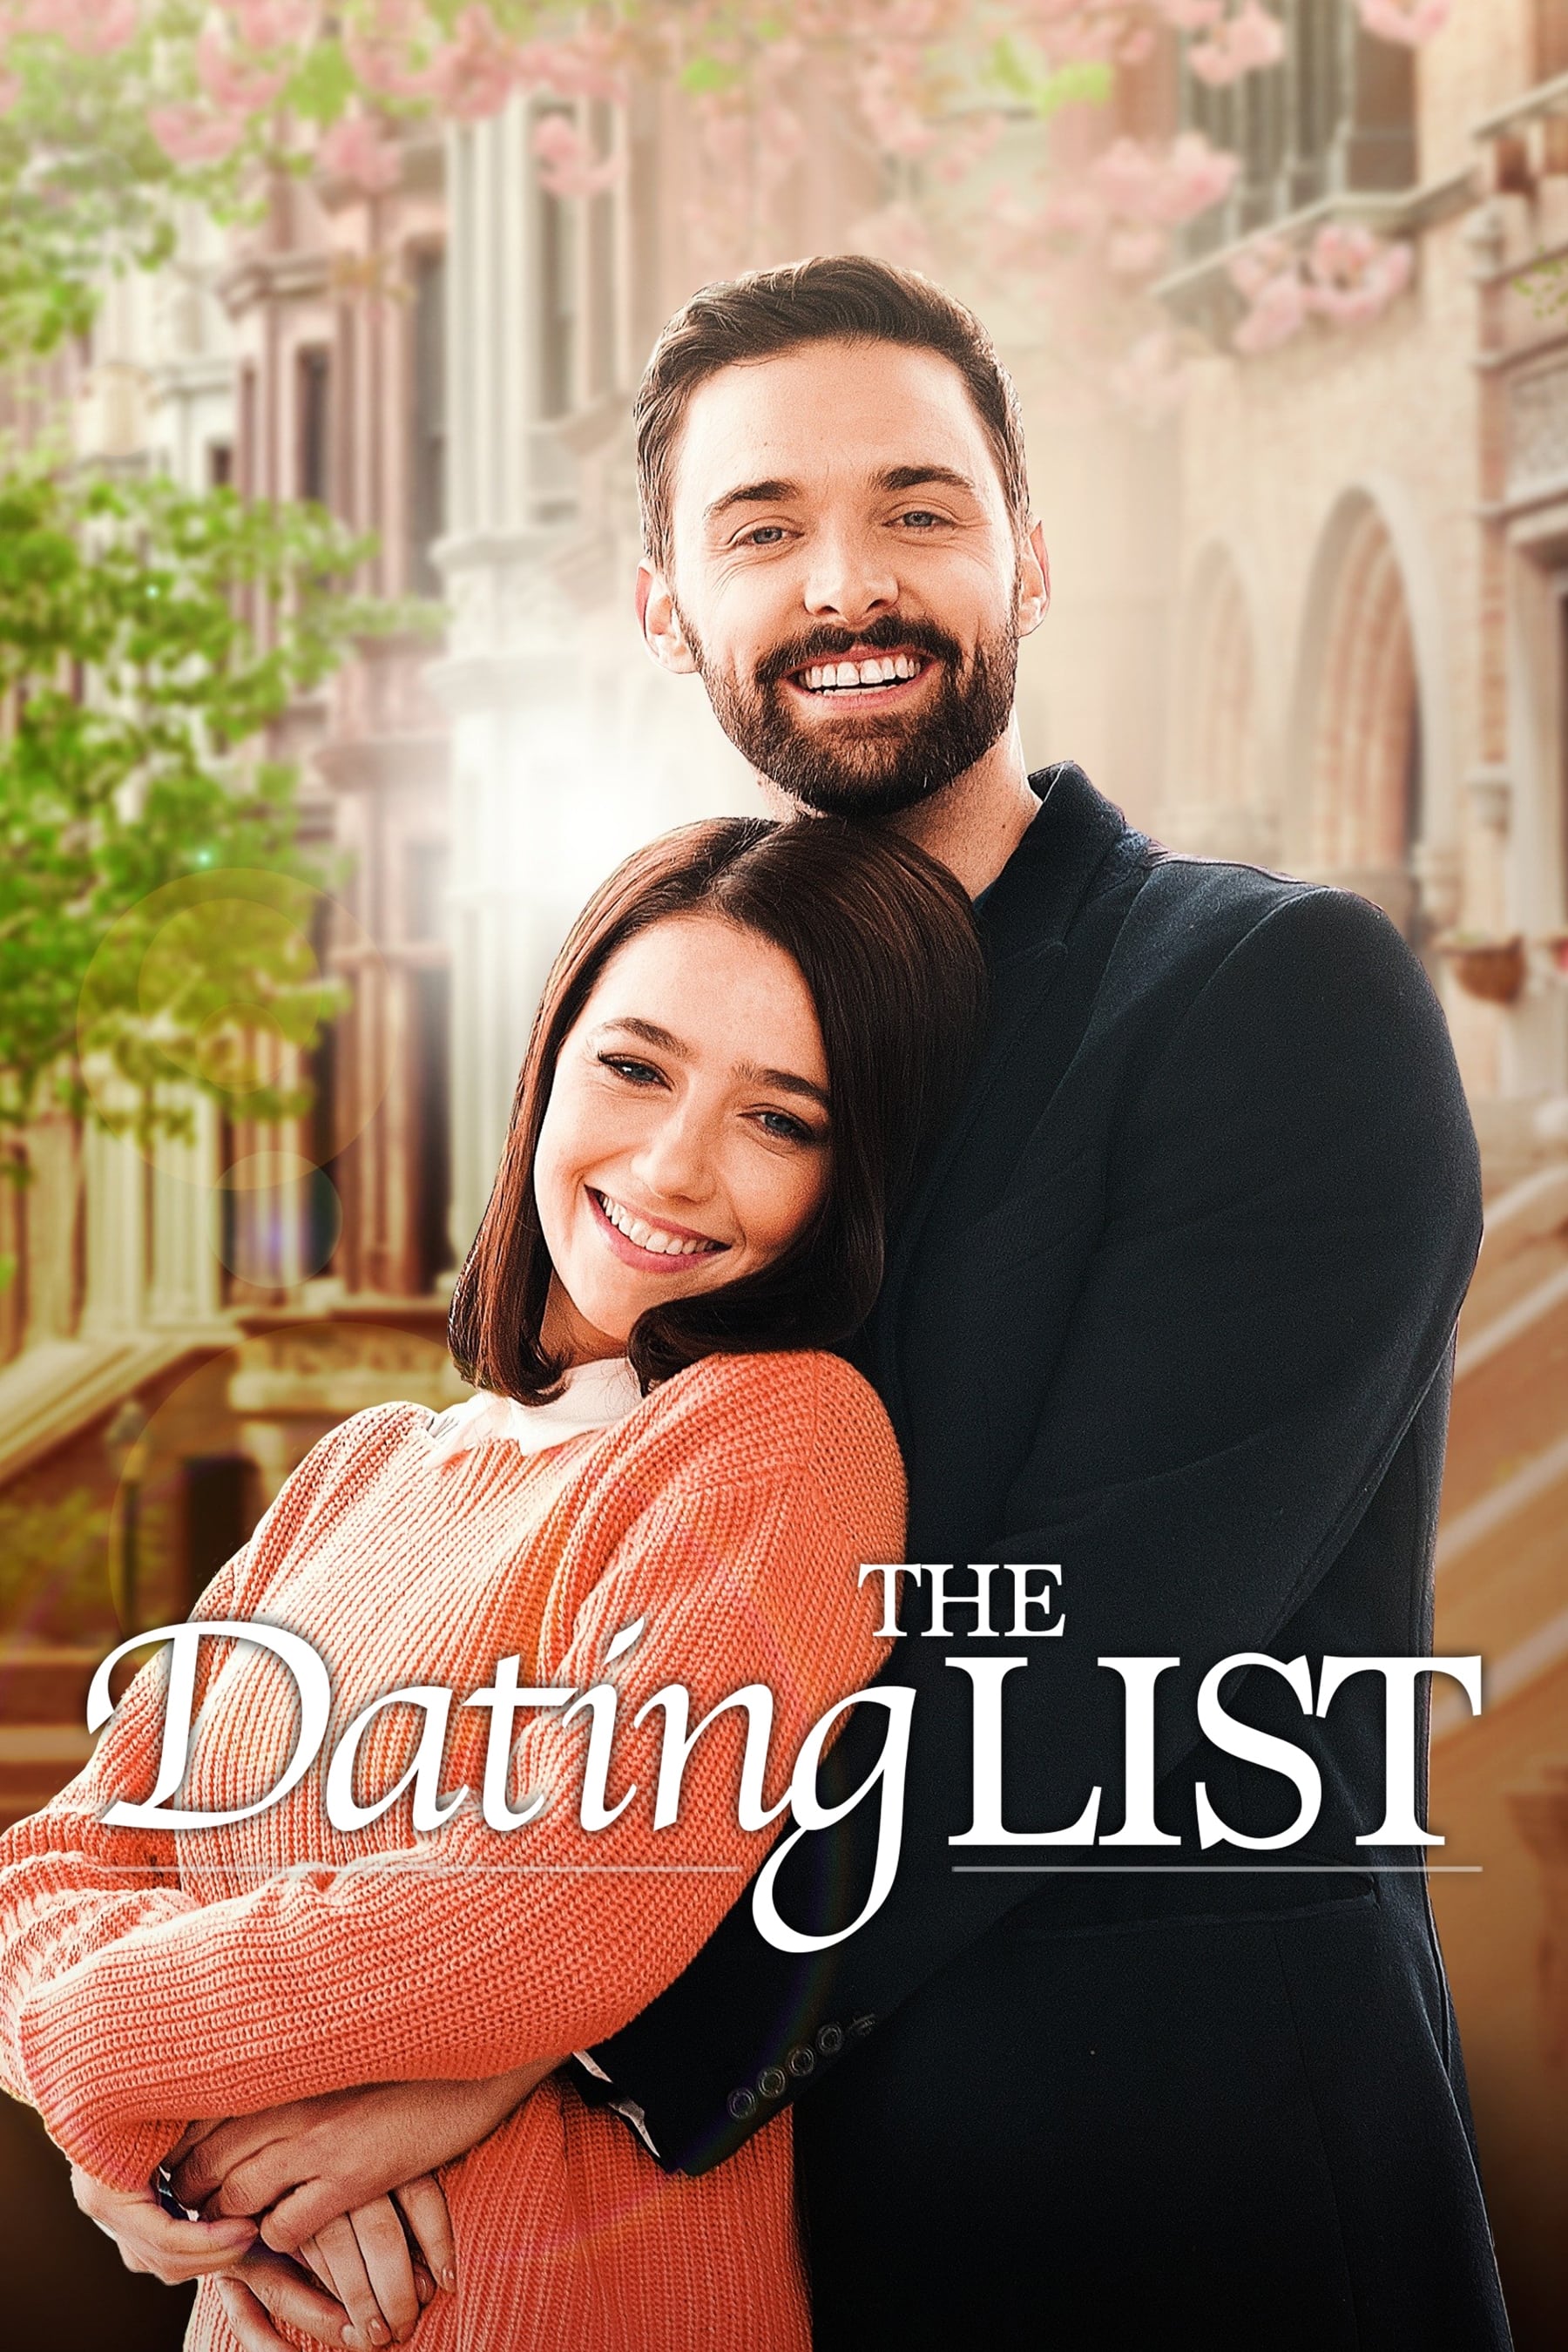 The Dating List (2019) Movie. Where To Watch Streaming Online & Plot